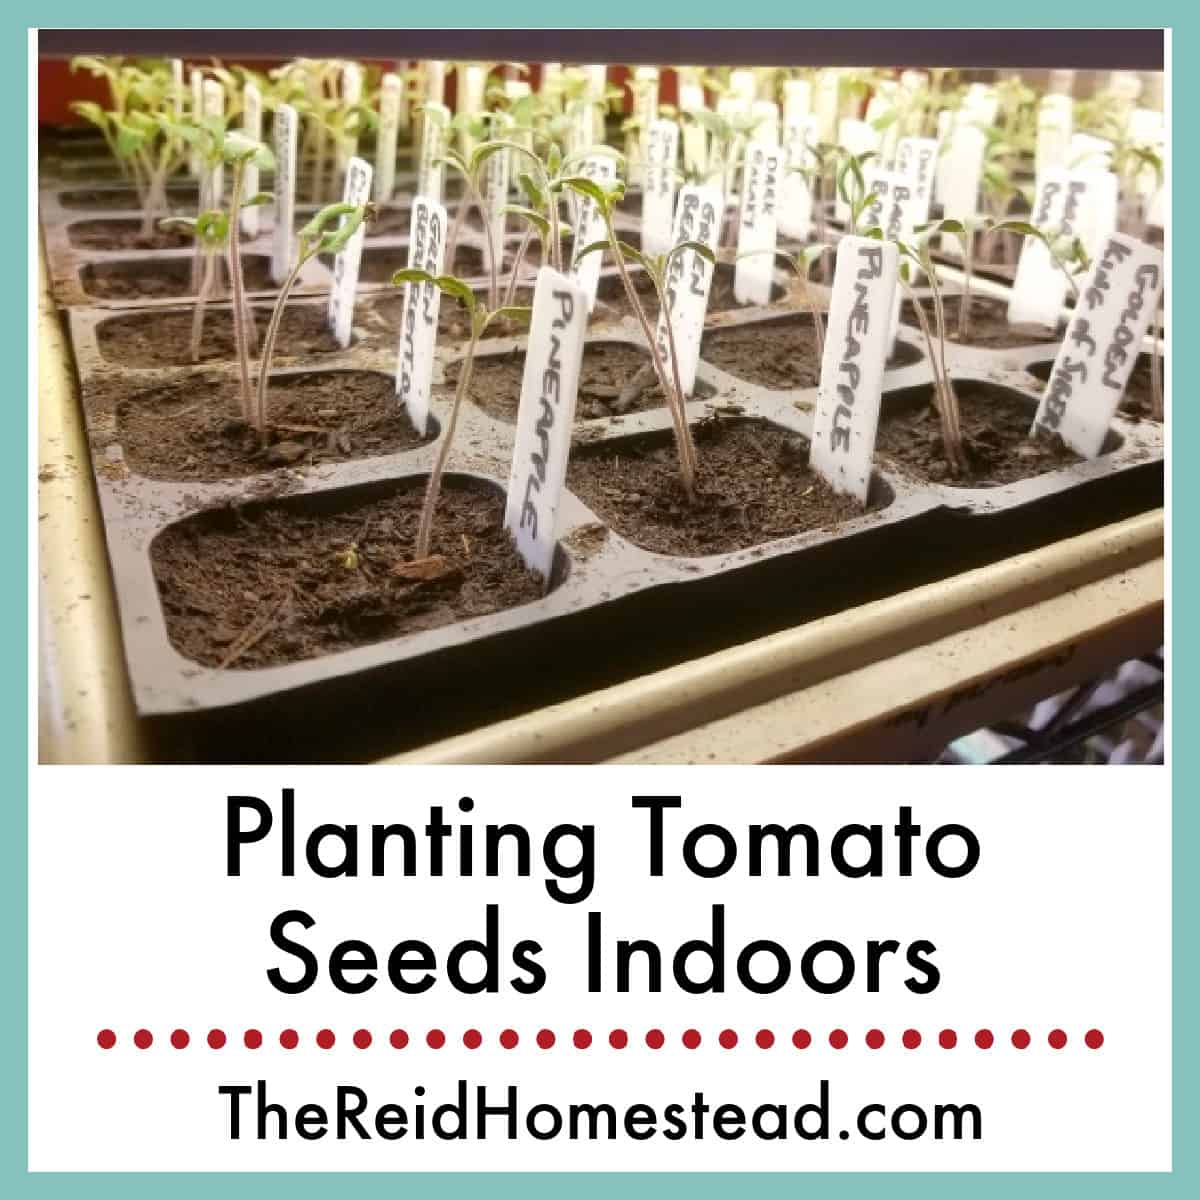 photo of tomato seedlings in a plant tray with text overlay Planting Tomato Seeds Indoors